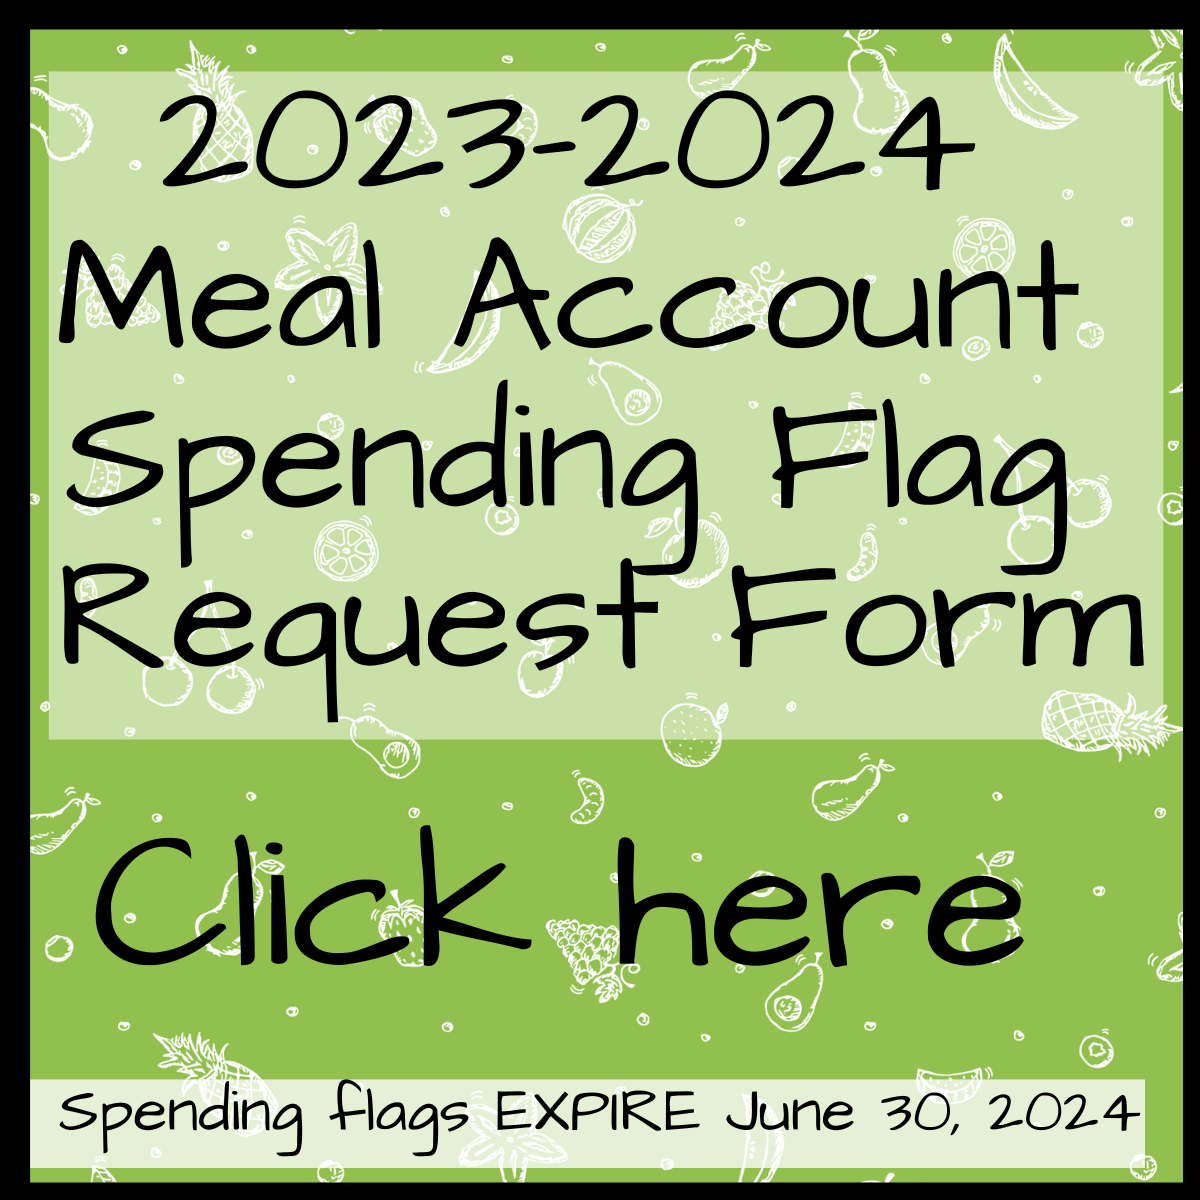 Button link to online Meal Account Spending Flag form